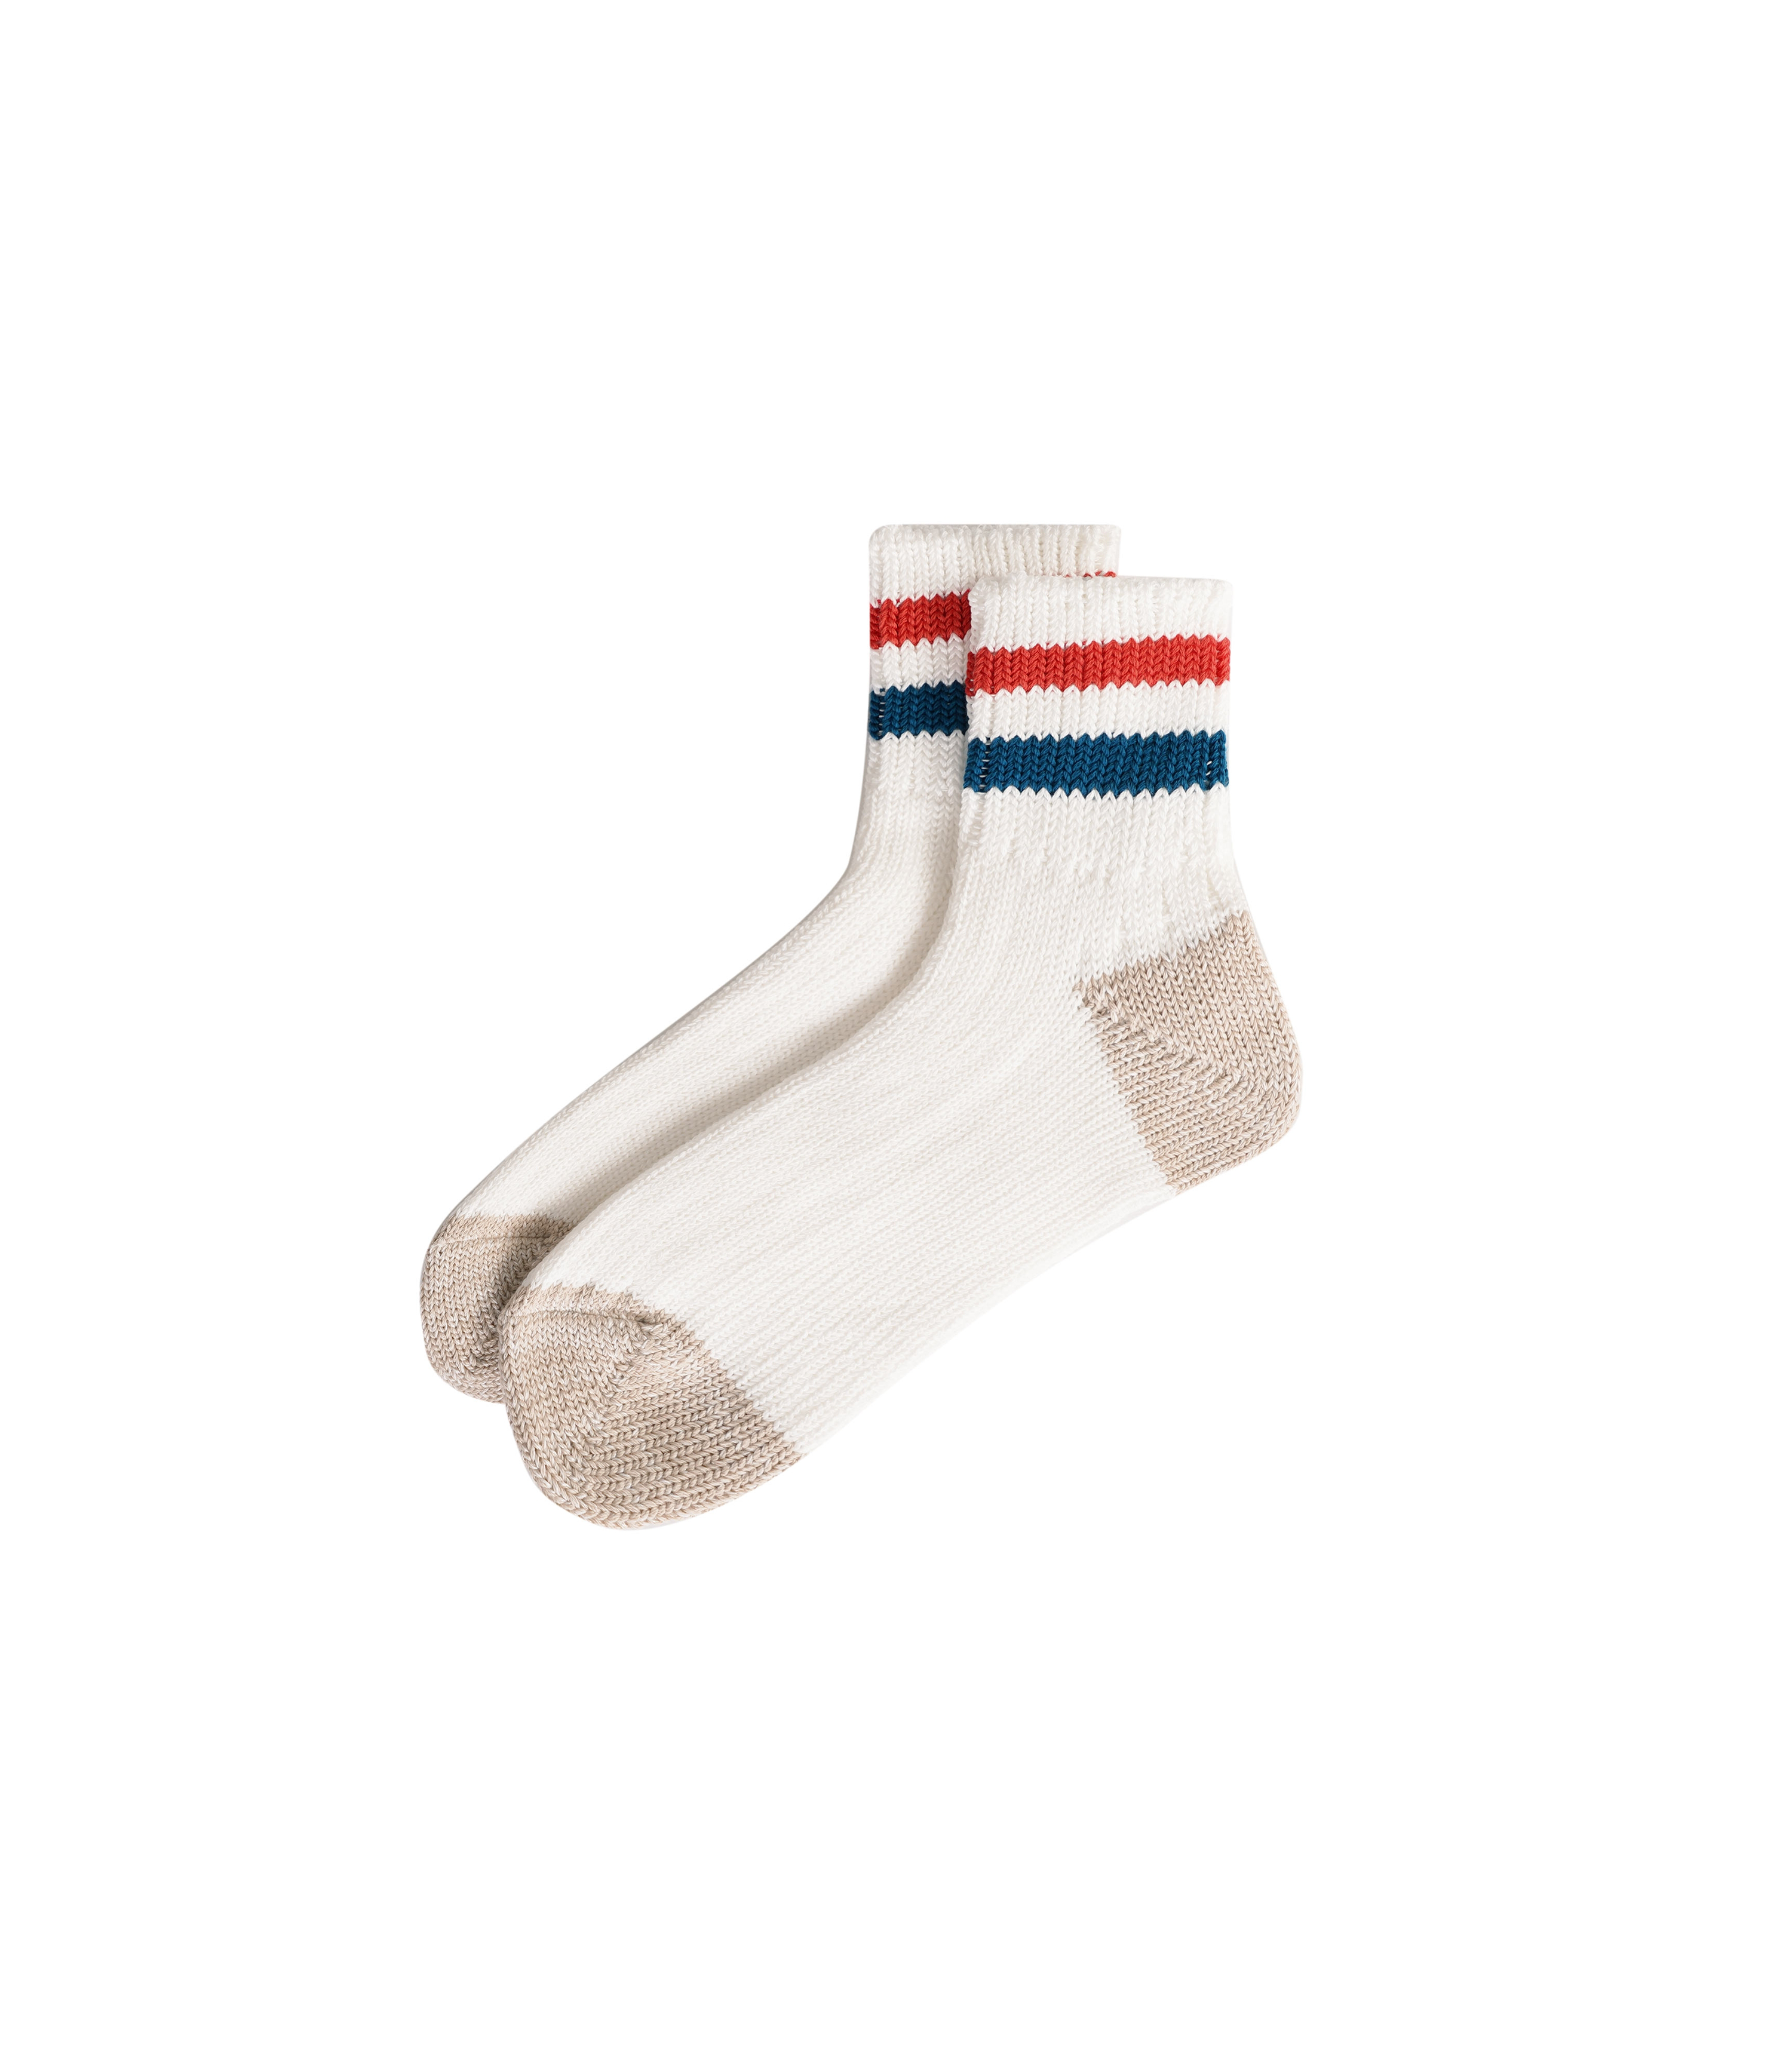 Coarse Ribbed Oldschool Ankle Sock - Red / Blue